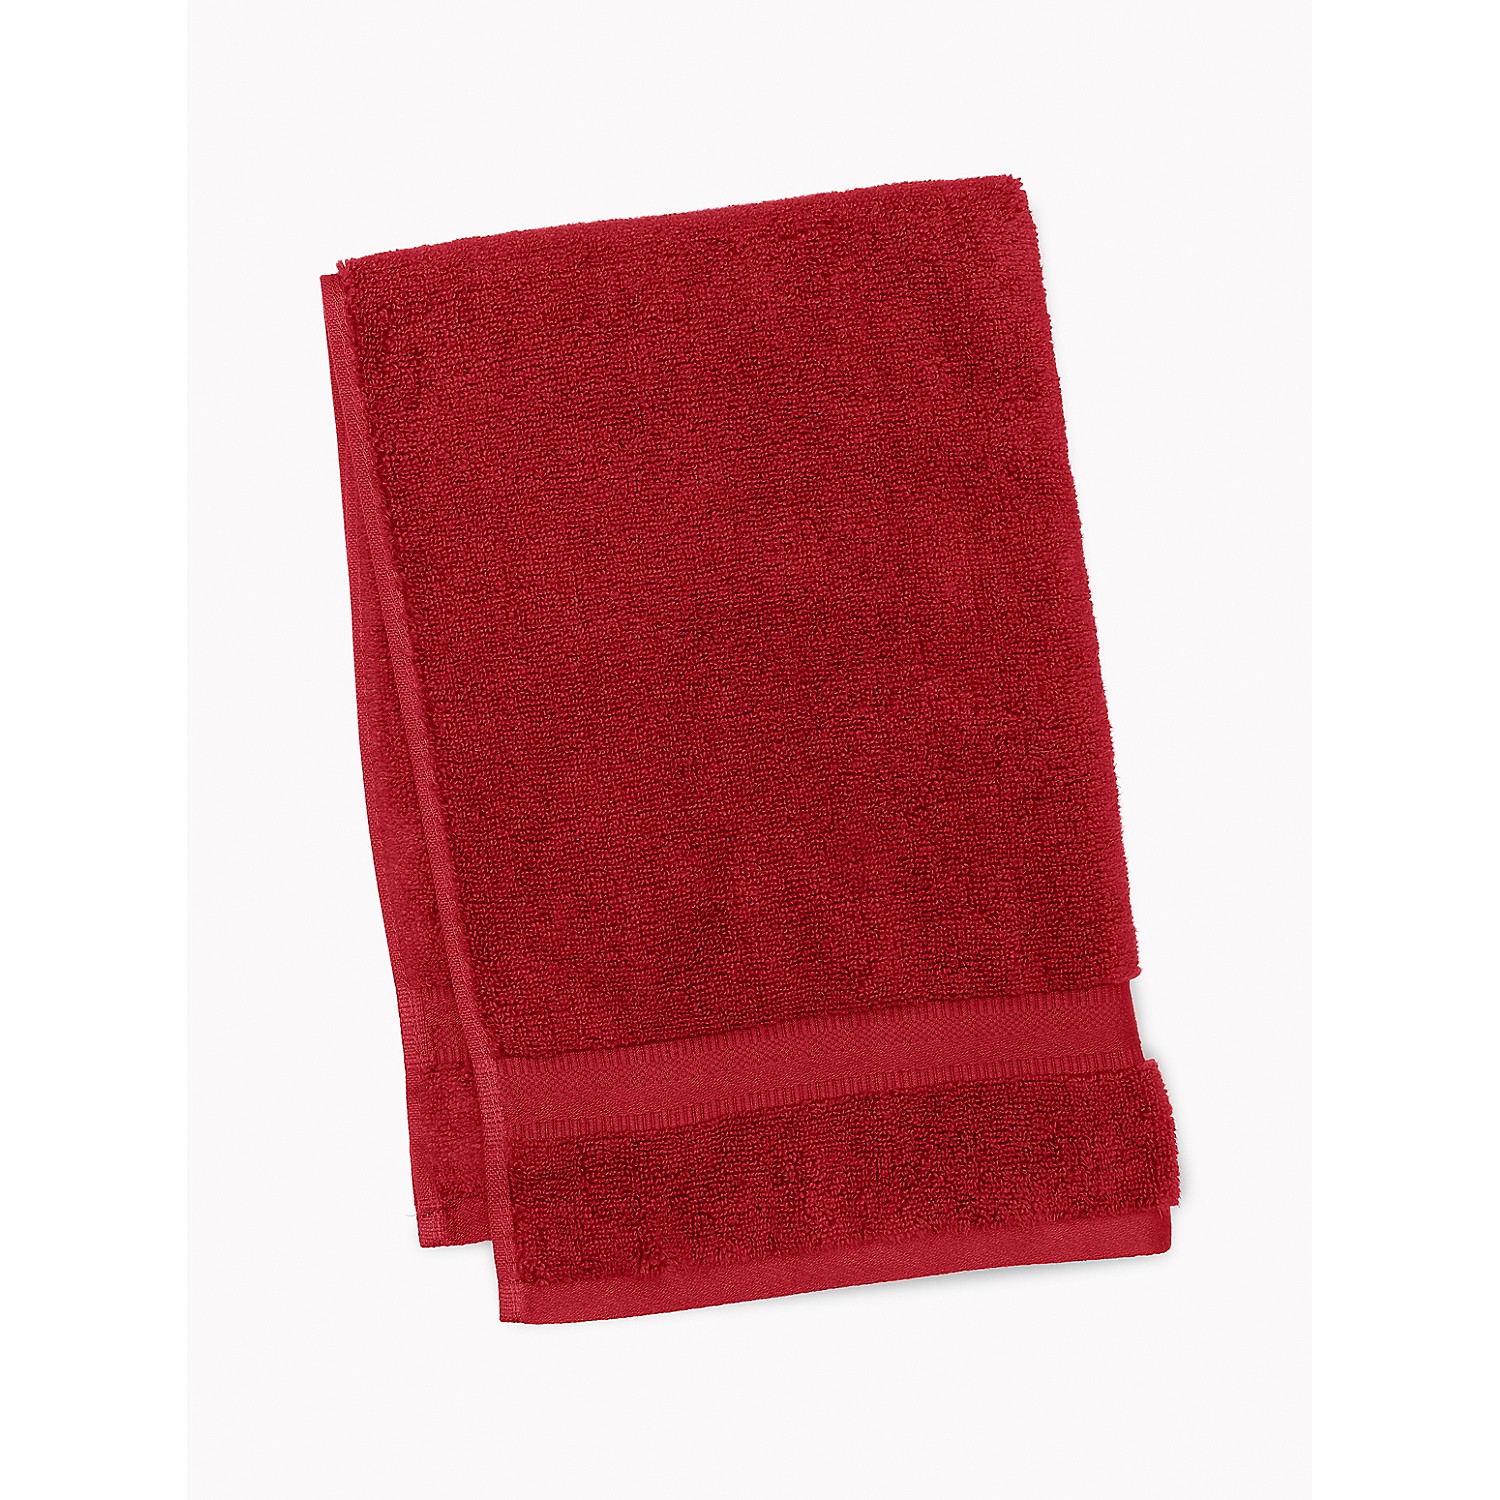 TOMMY HILFIGER Signature Solid Hand Towel in Biking Red